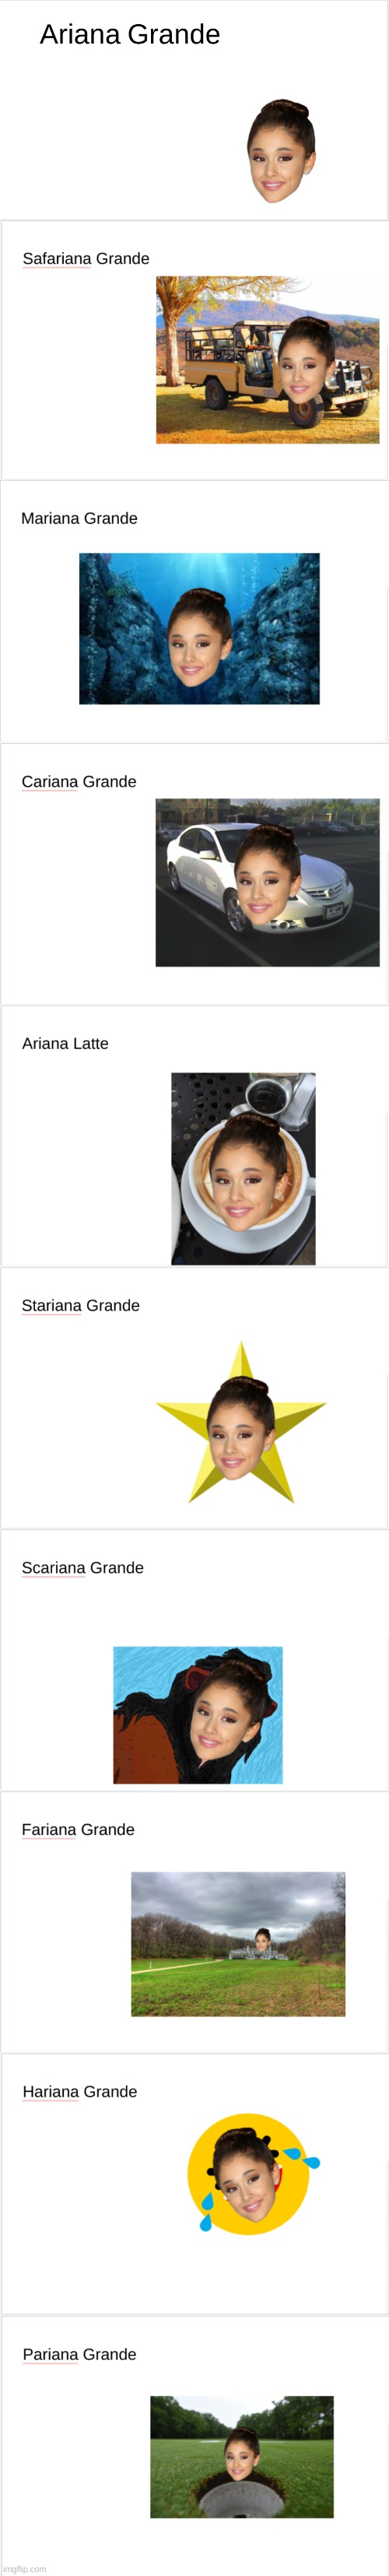 This Took Longer To Make Than It Should Have | image tagged in ariana grande,funny,memes,why did i make this,im not ok,lmfao | made w/ Imgflip meme maker